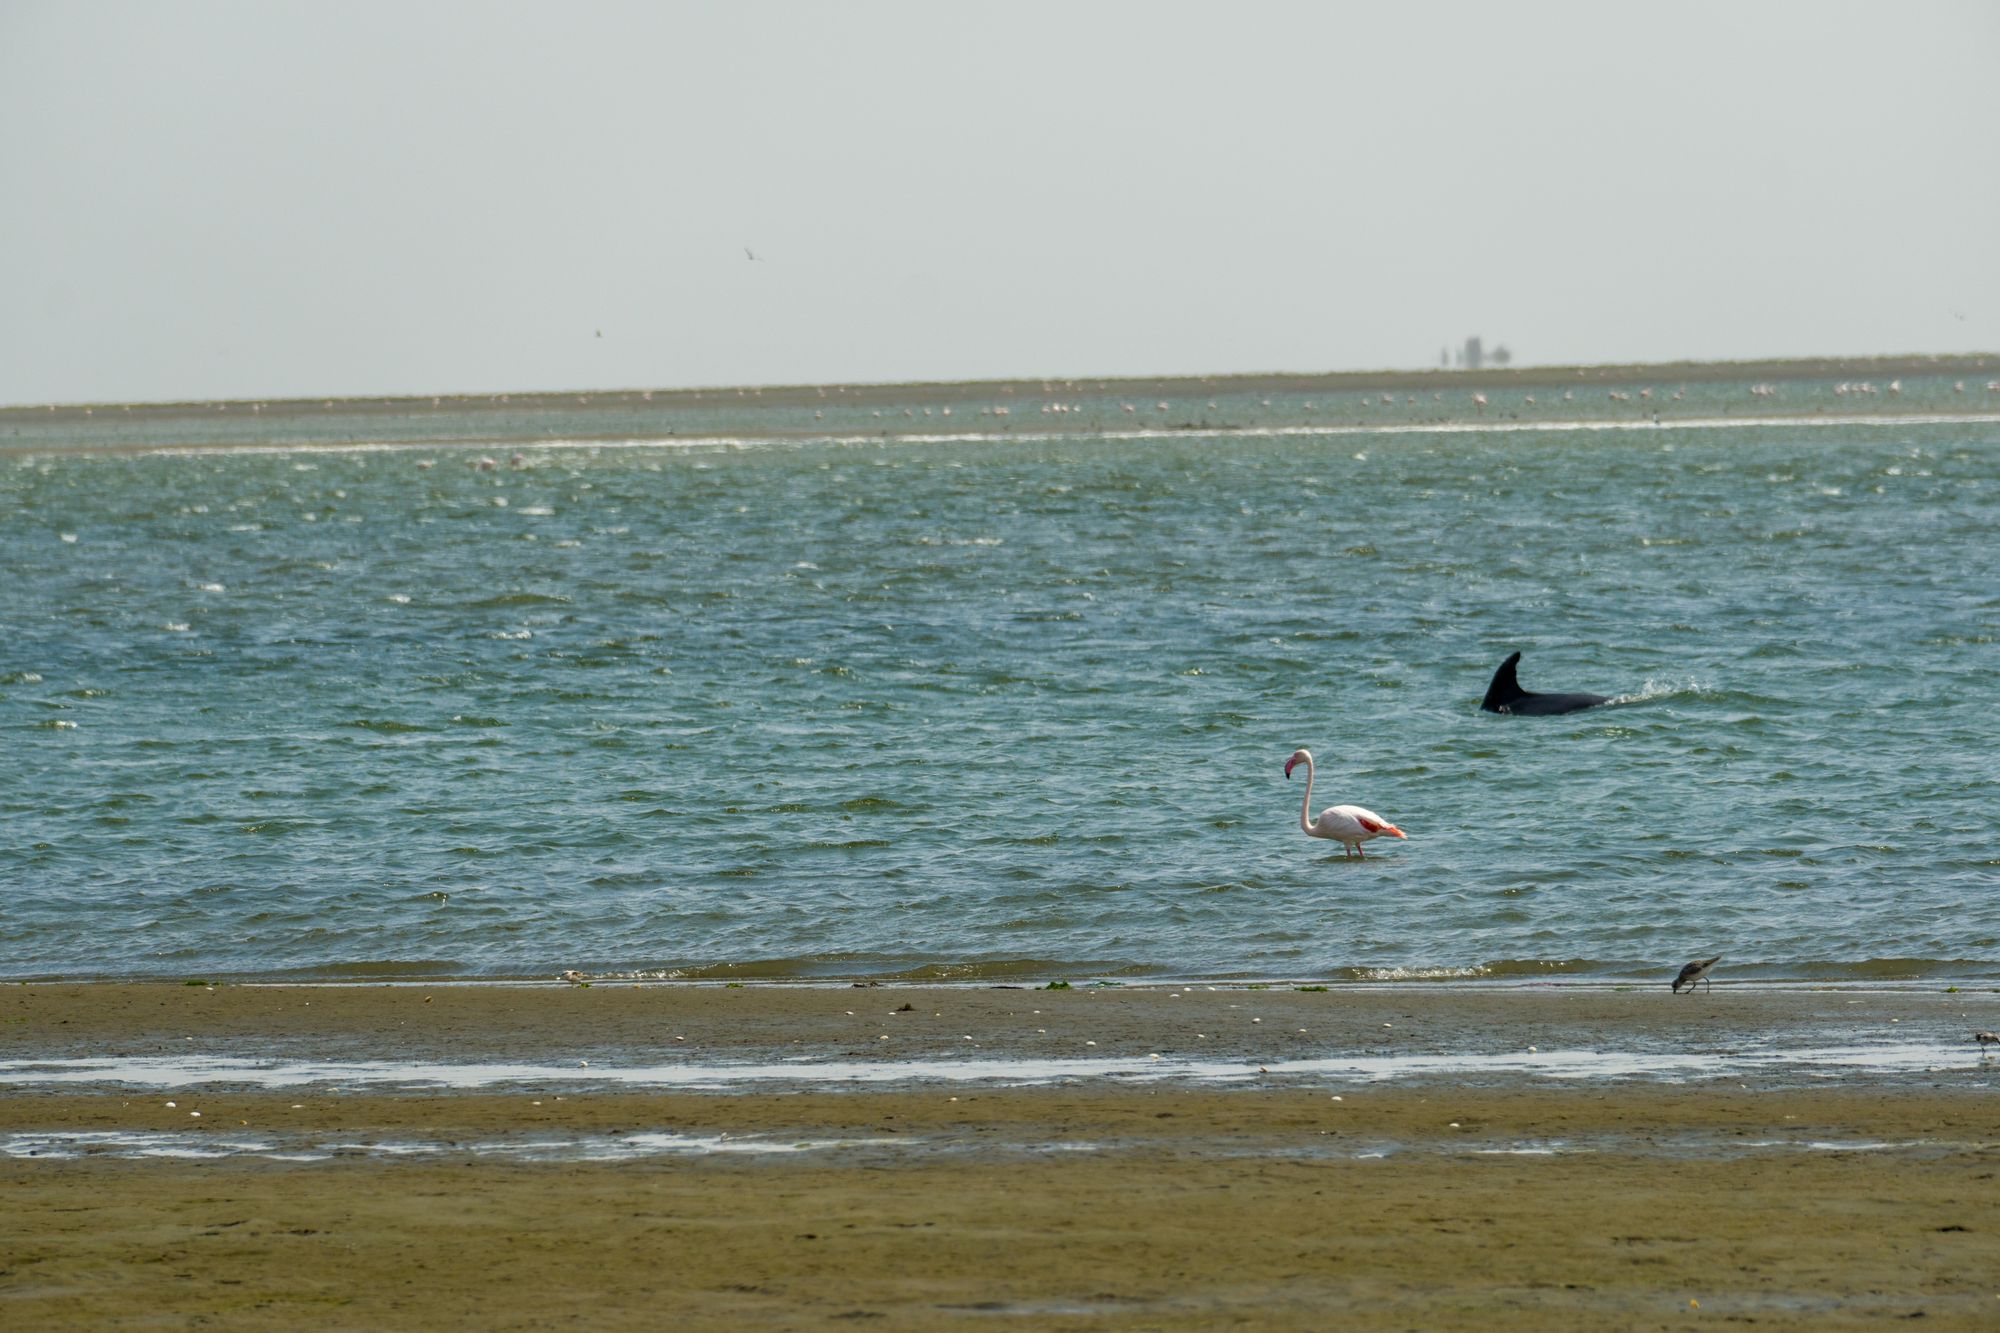 Day 5 and 6: Solitaire and Walvis Bay